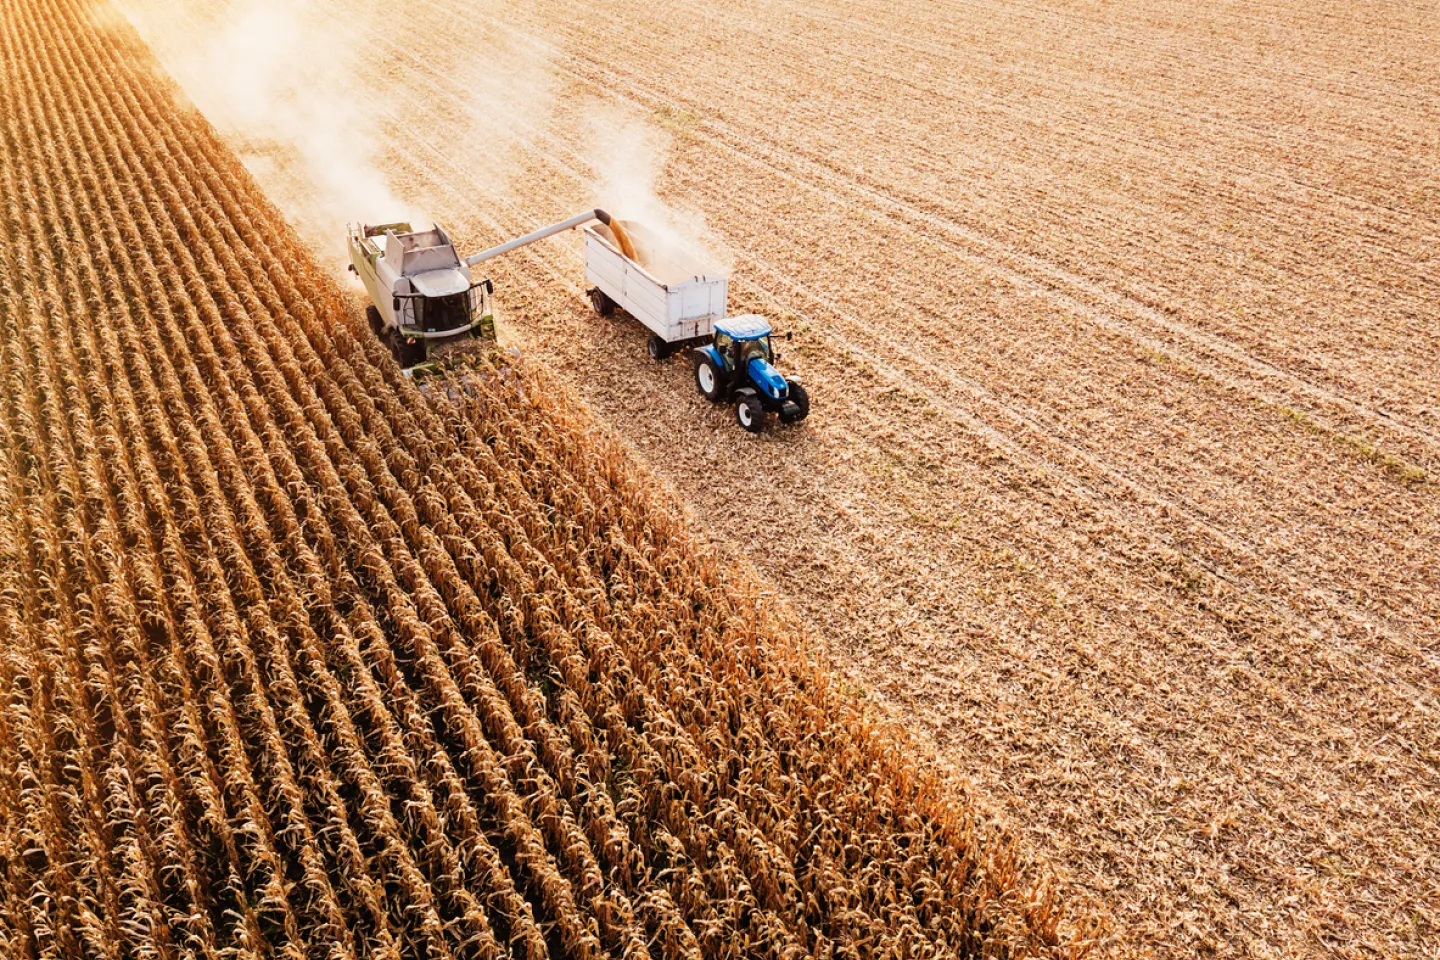 Corn field being harvested